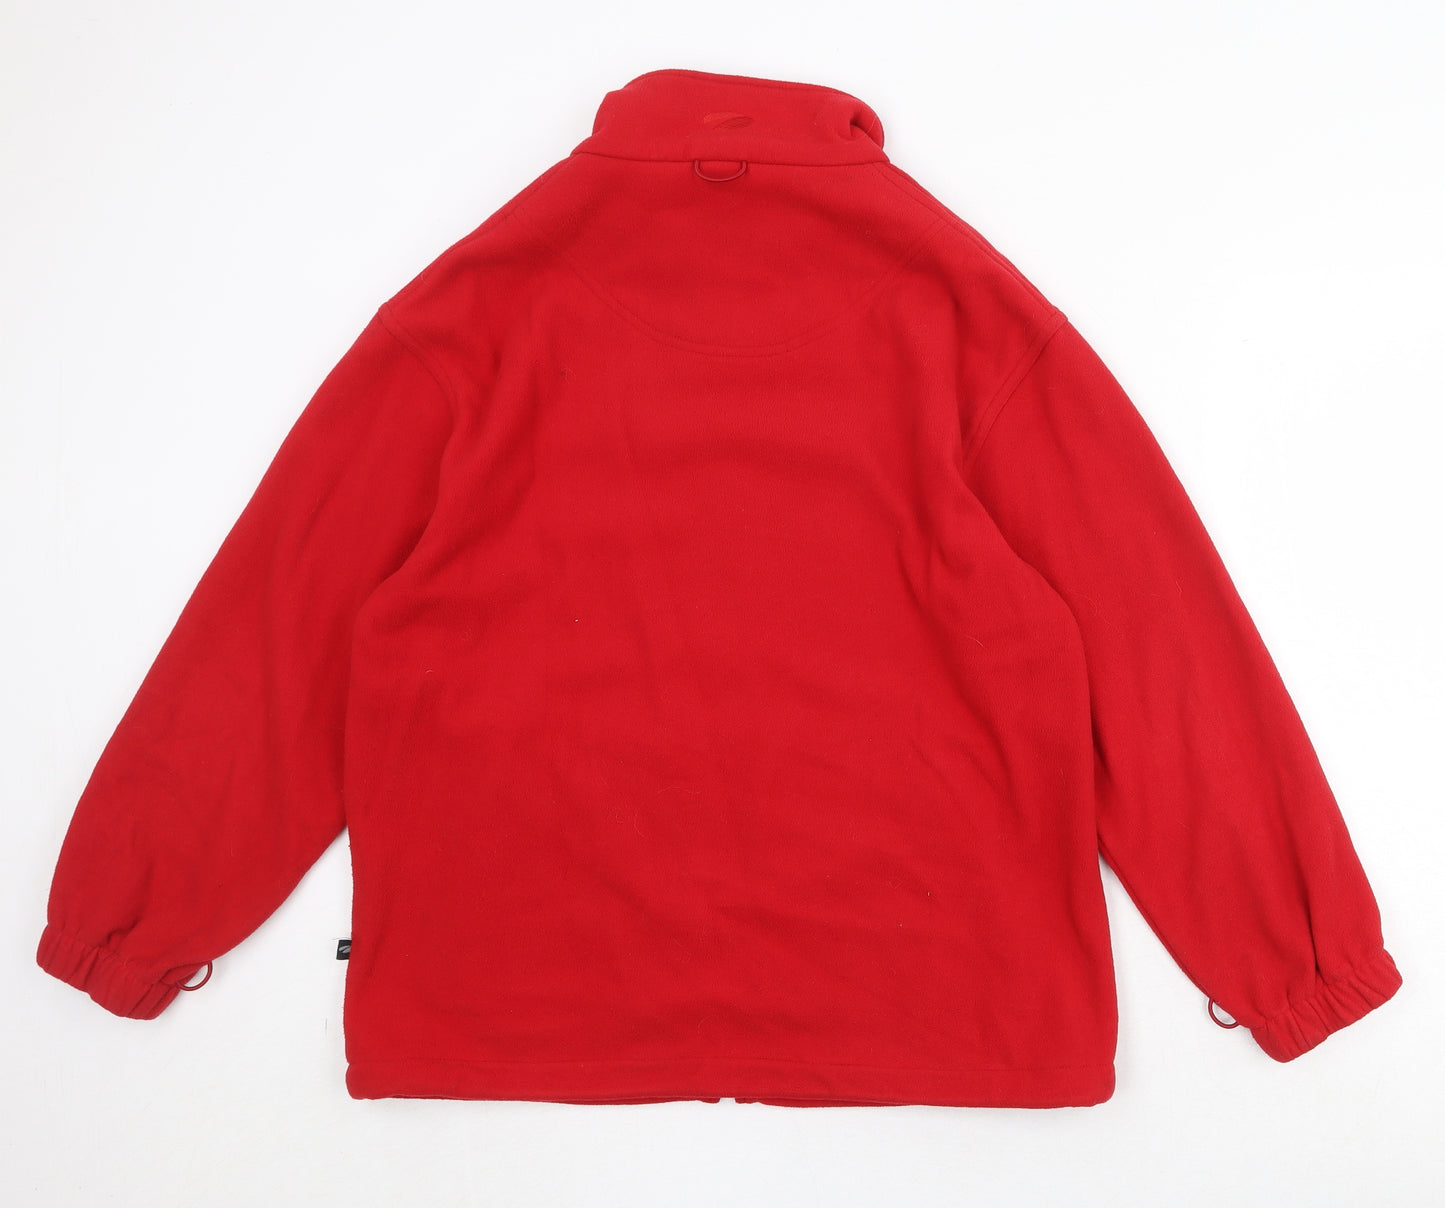 Mountain Life Womens Red Jacket Size 12 Zip